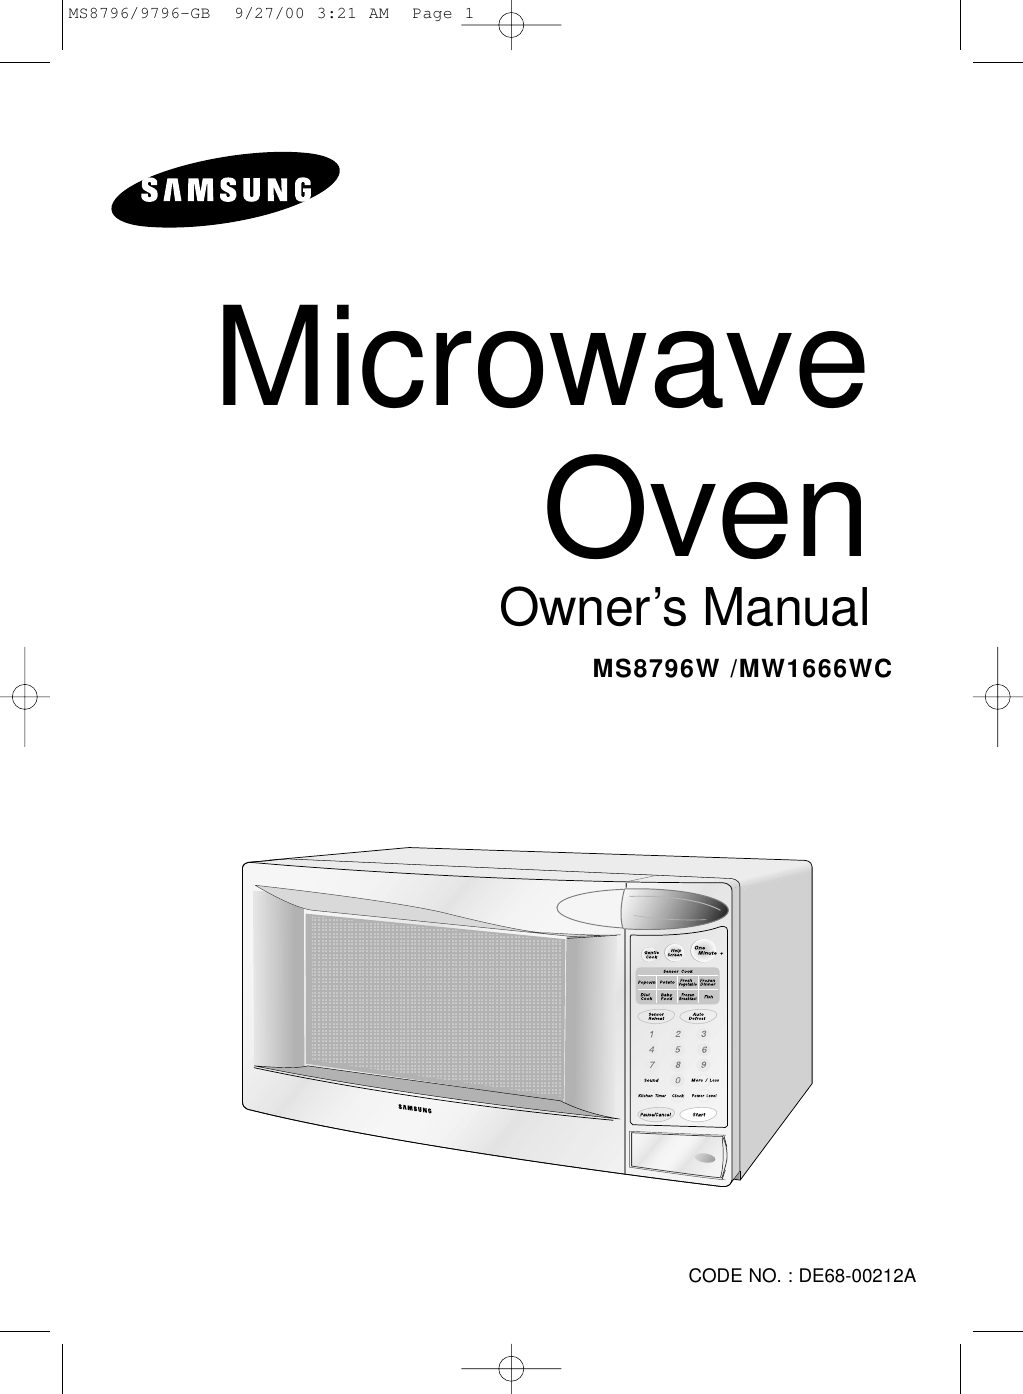 Microwave OvenOwner’s ManualMS8796W /MW1666WCCODE NO. : DE68-00212AMS8796/9796-GB  9/27/00 3:21 AM  Page 1